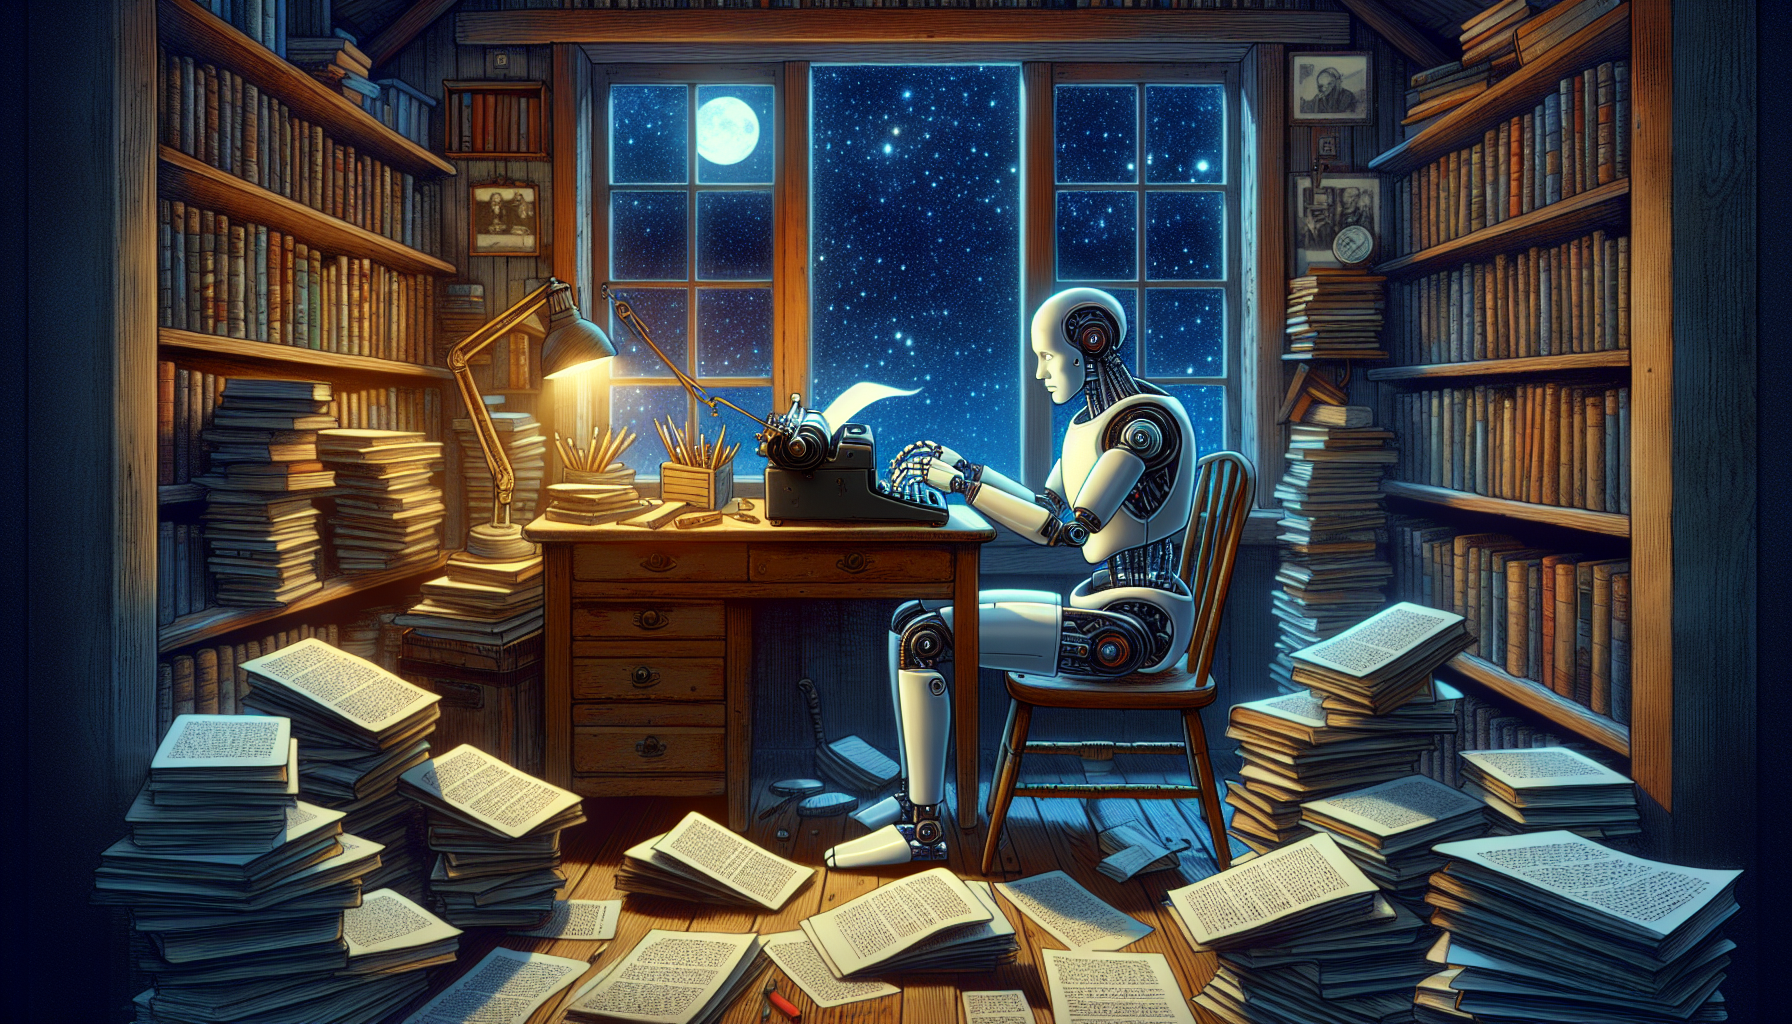 An image of a humanoid robot with gentle eyes, sitting at a vintage wooden writer’s desk in a cozy, dimly lit room filled with books. The robot is typing on an old typewriter, a stack of screenplay ma